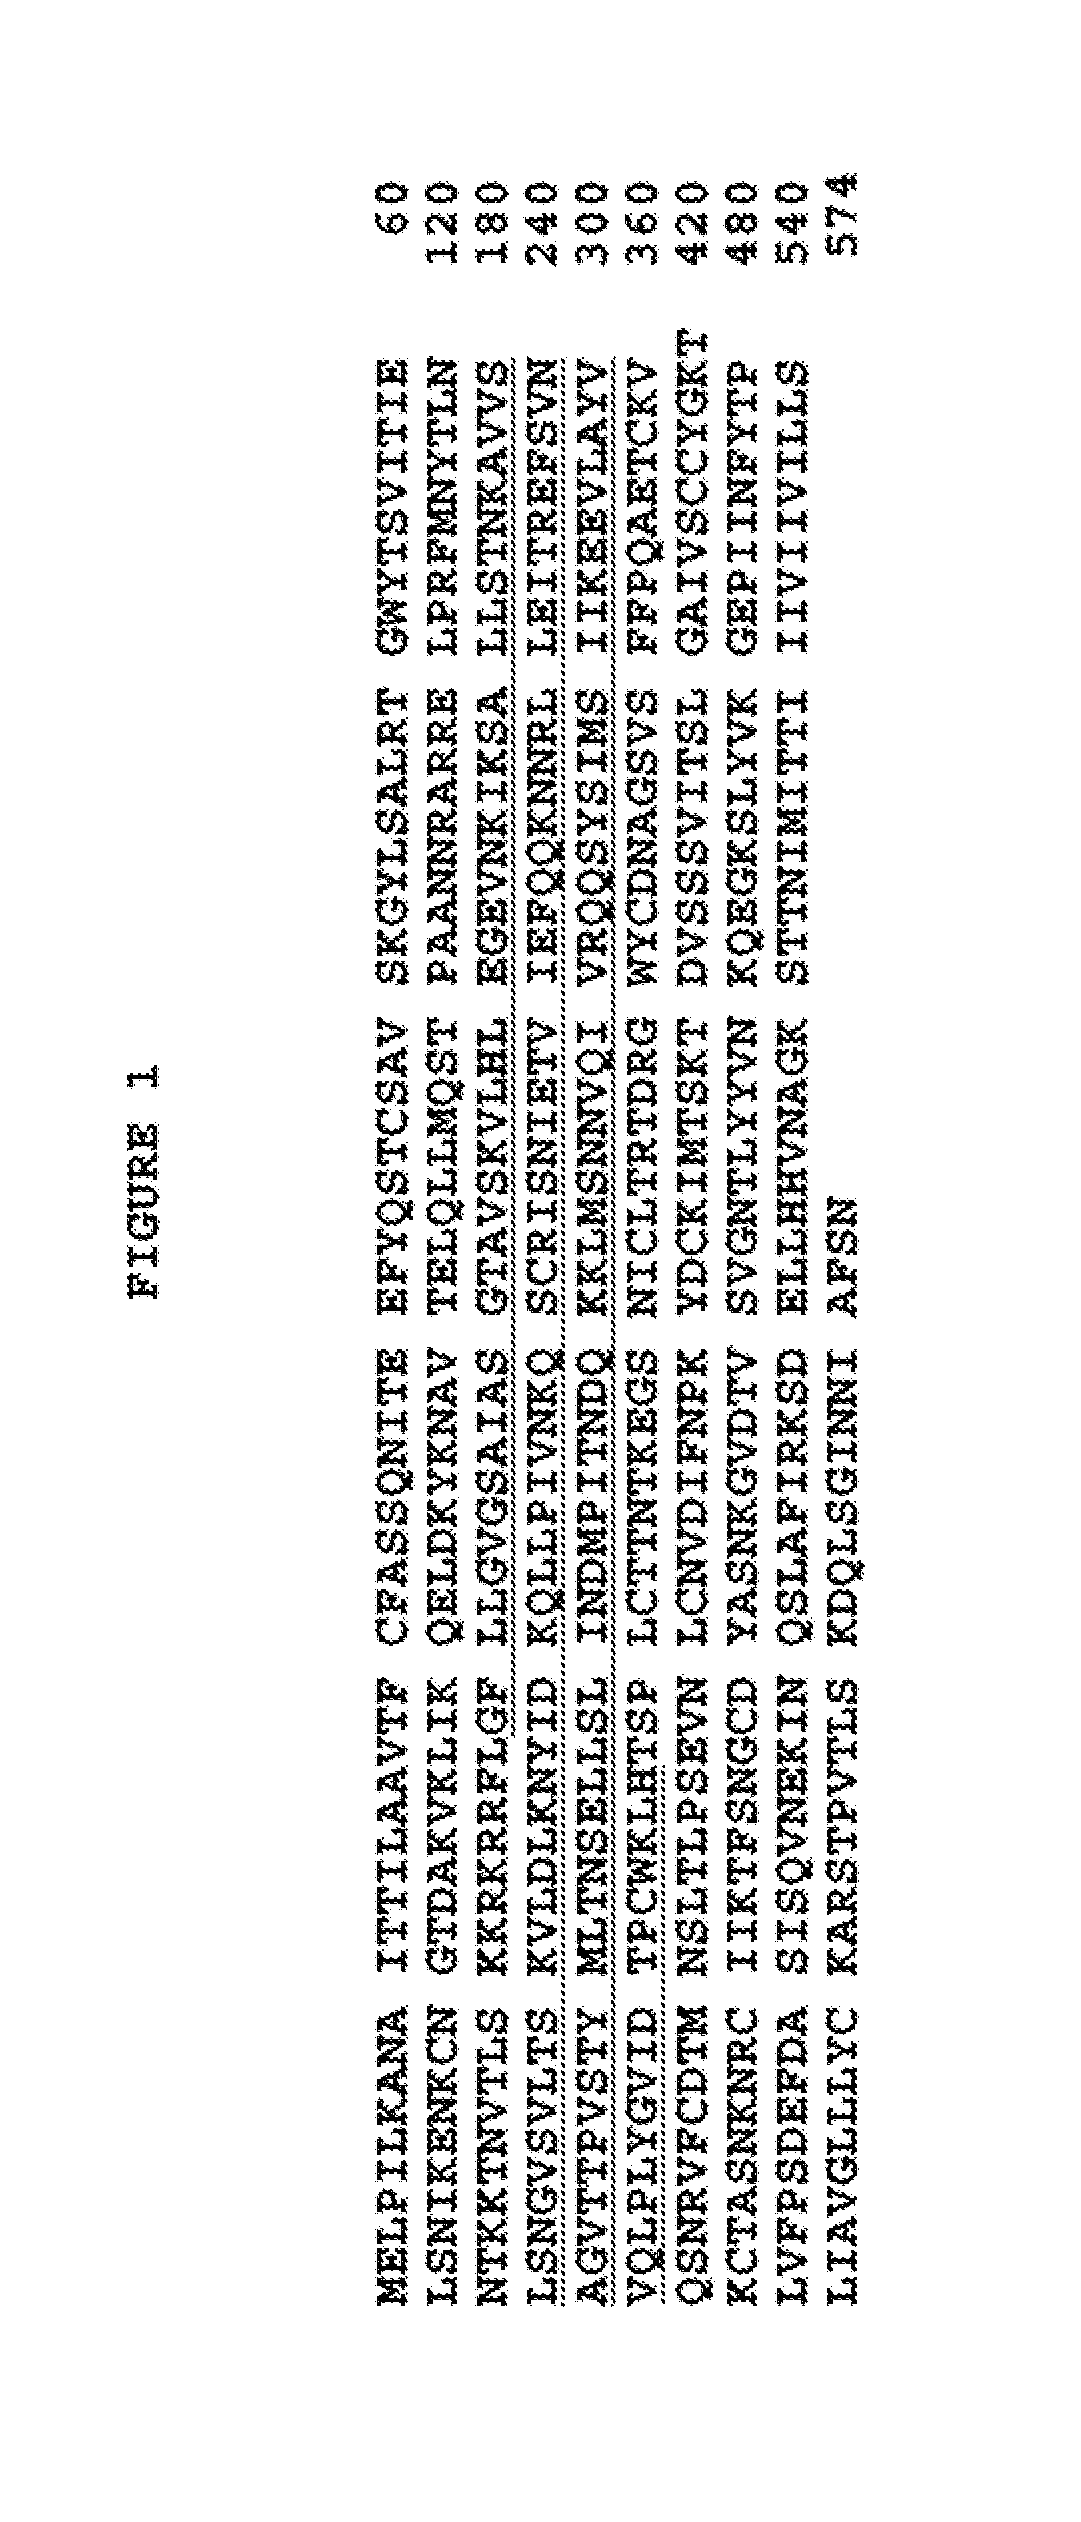 Antibodies Against And Methods For Producing Vaccines For Respiratory Syncytial Virus